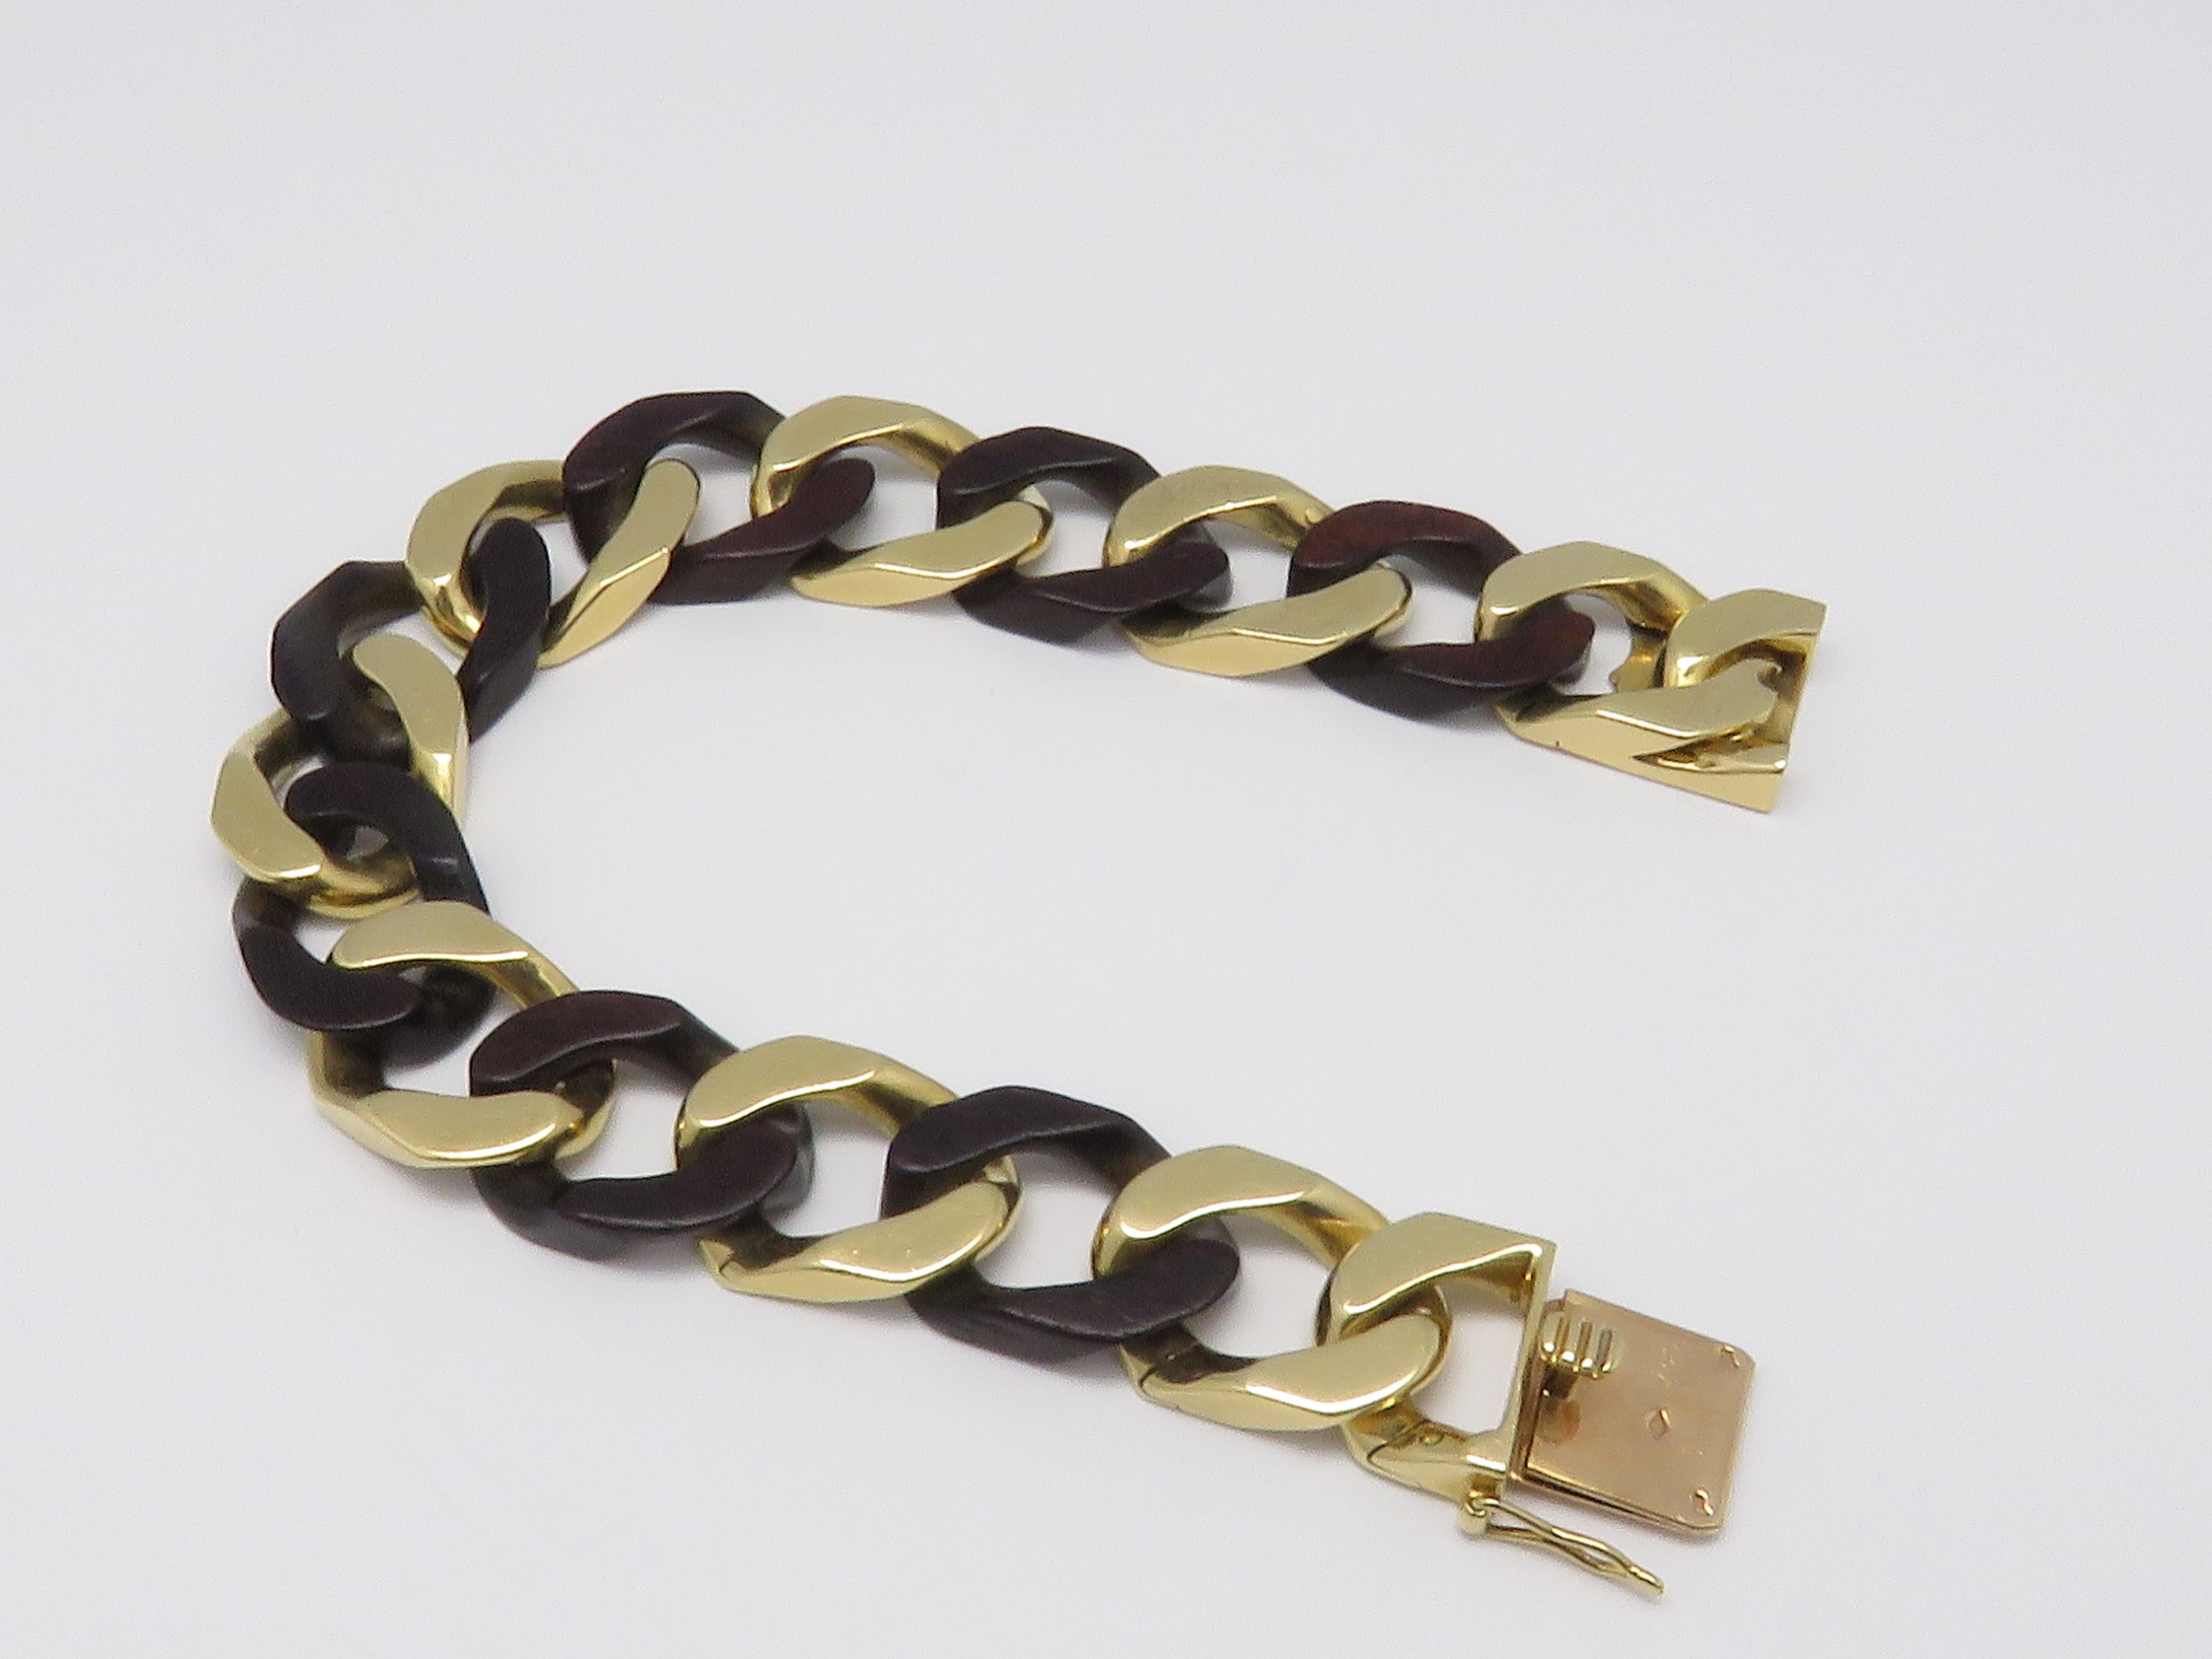 Designed as an alternating series of yellow gold and wood curbed links.

Signed V.C.A and Numbered.

French assay marks.

Measurements:

Width: 0.55 in     Length: 7.48 in        Weight: 58.36 grams
